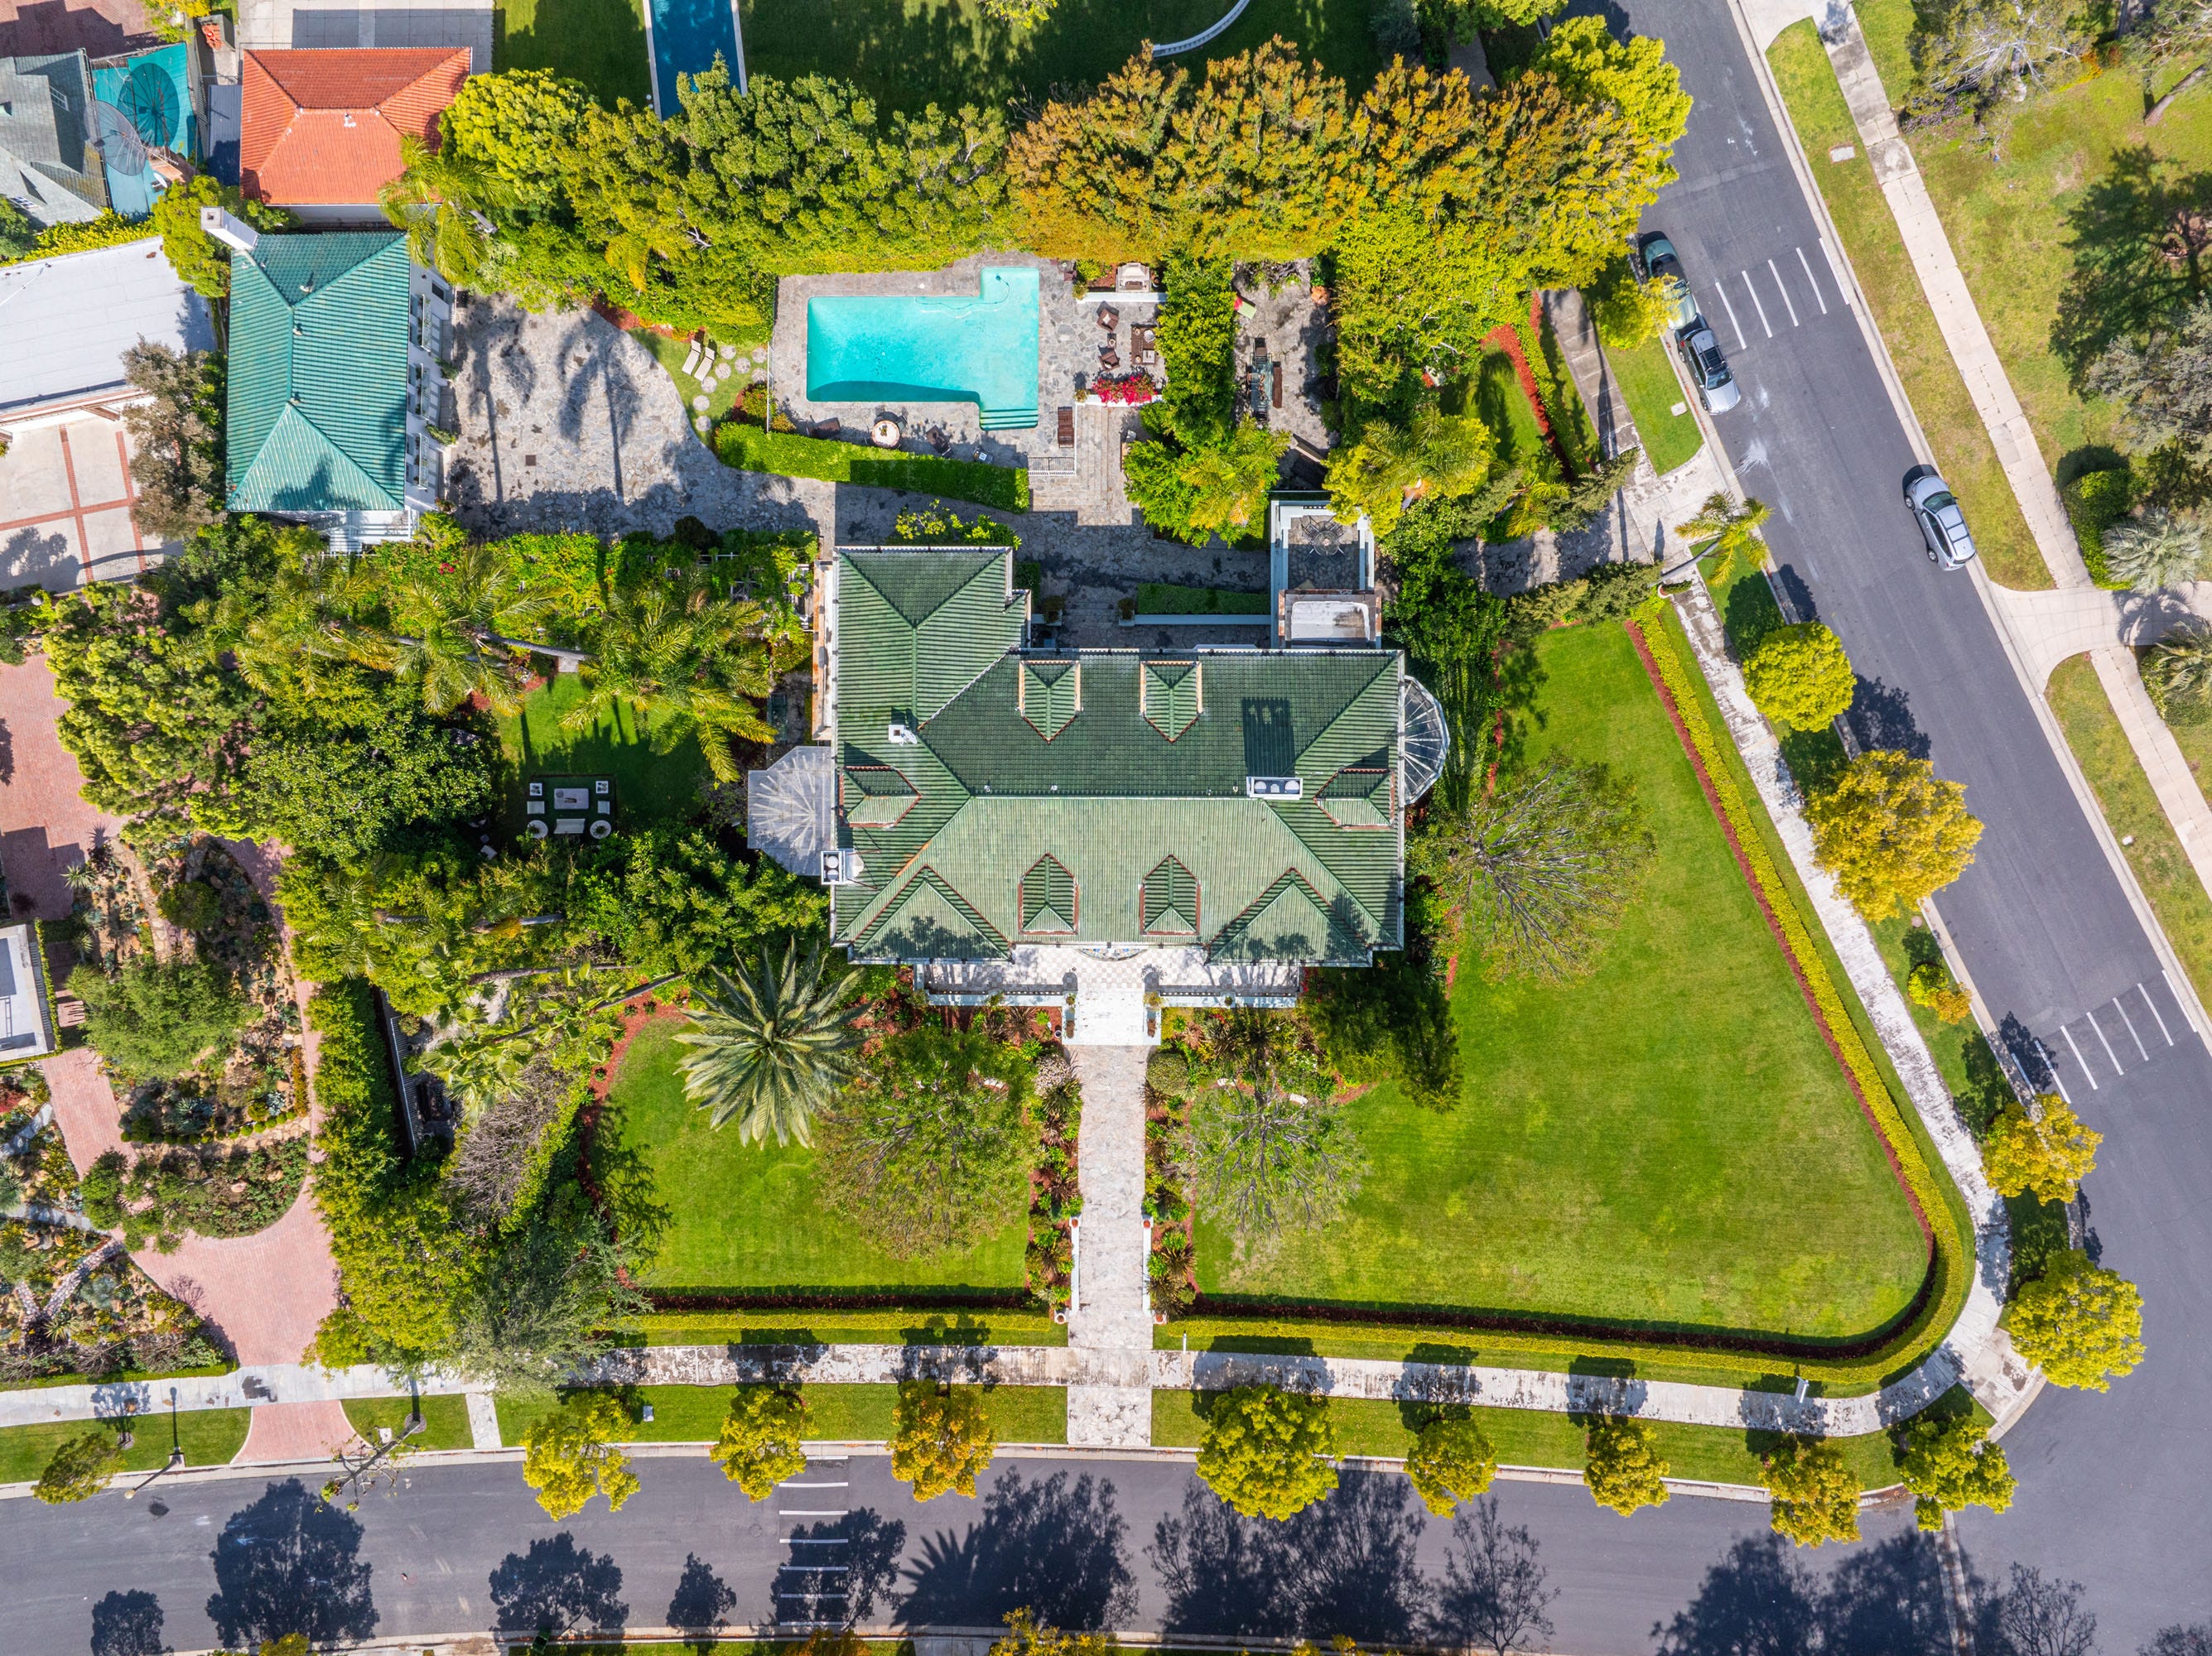 swanky los angeles mansion once owned by muhammad ali up for auction. see photos